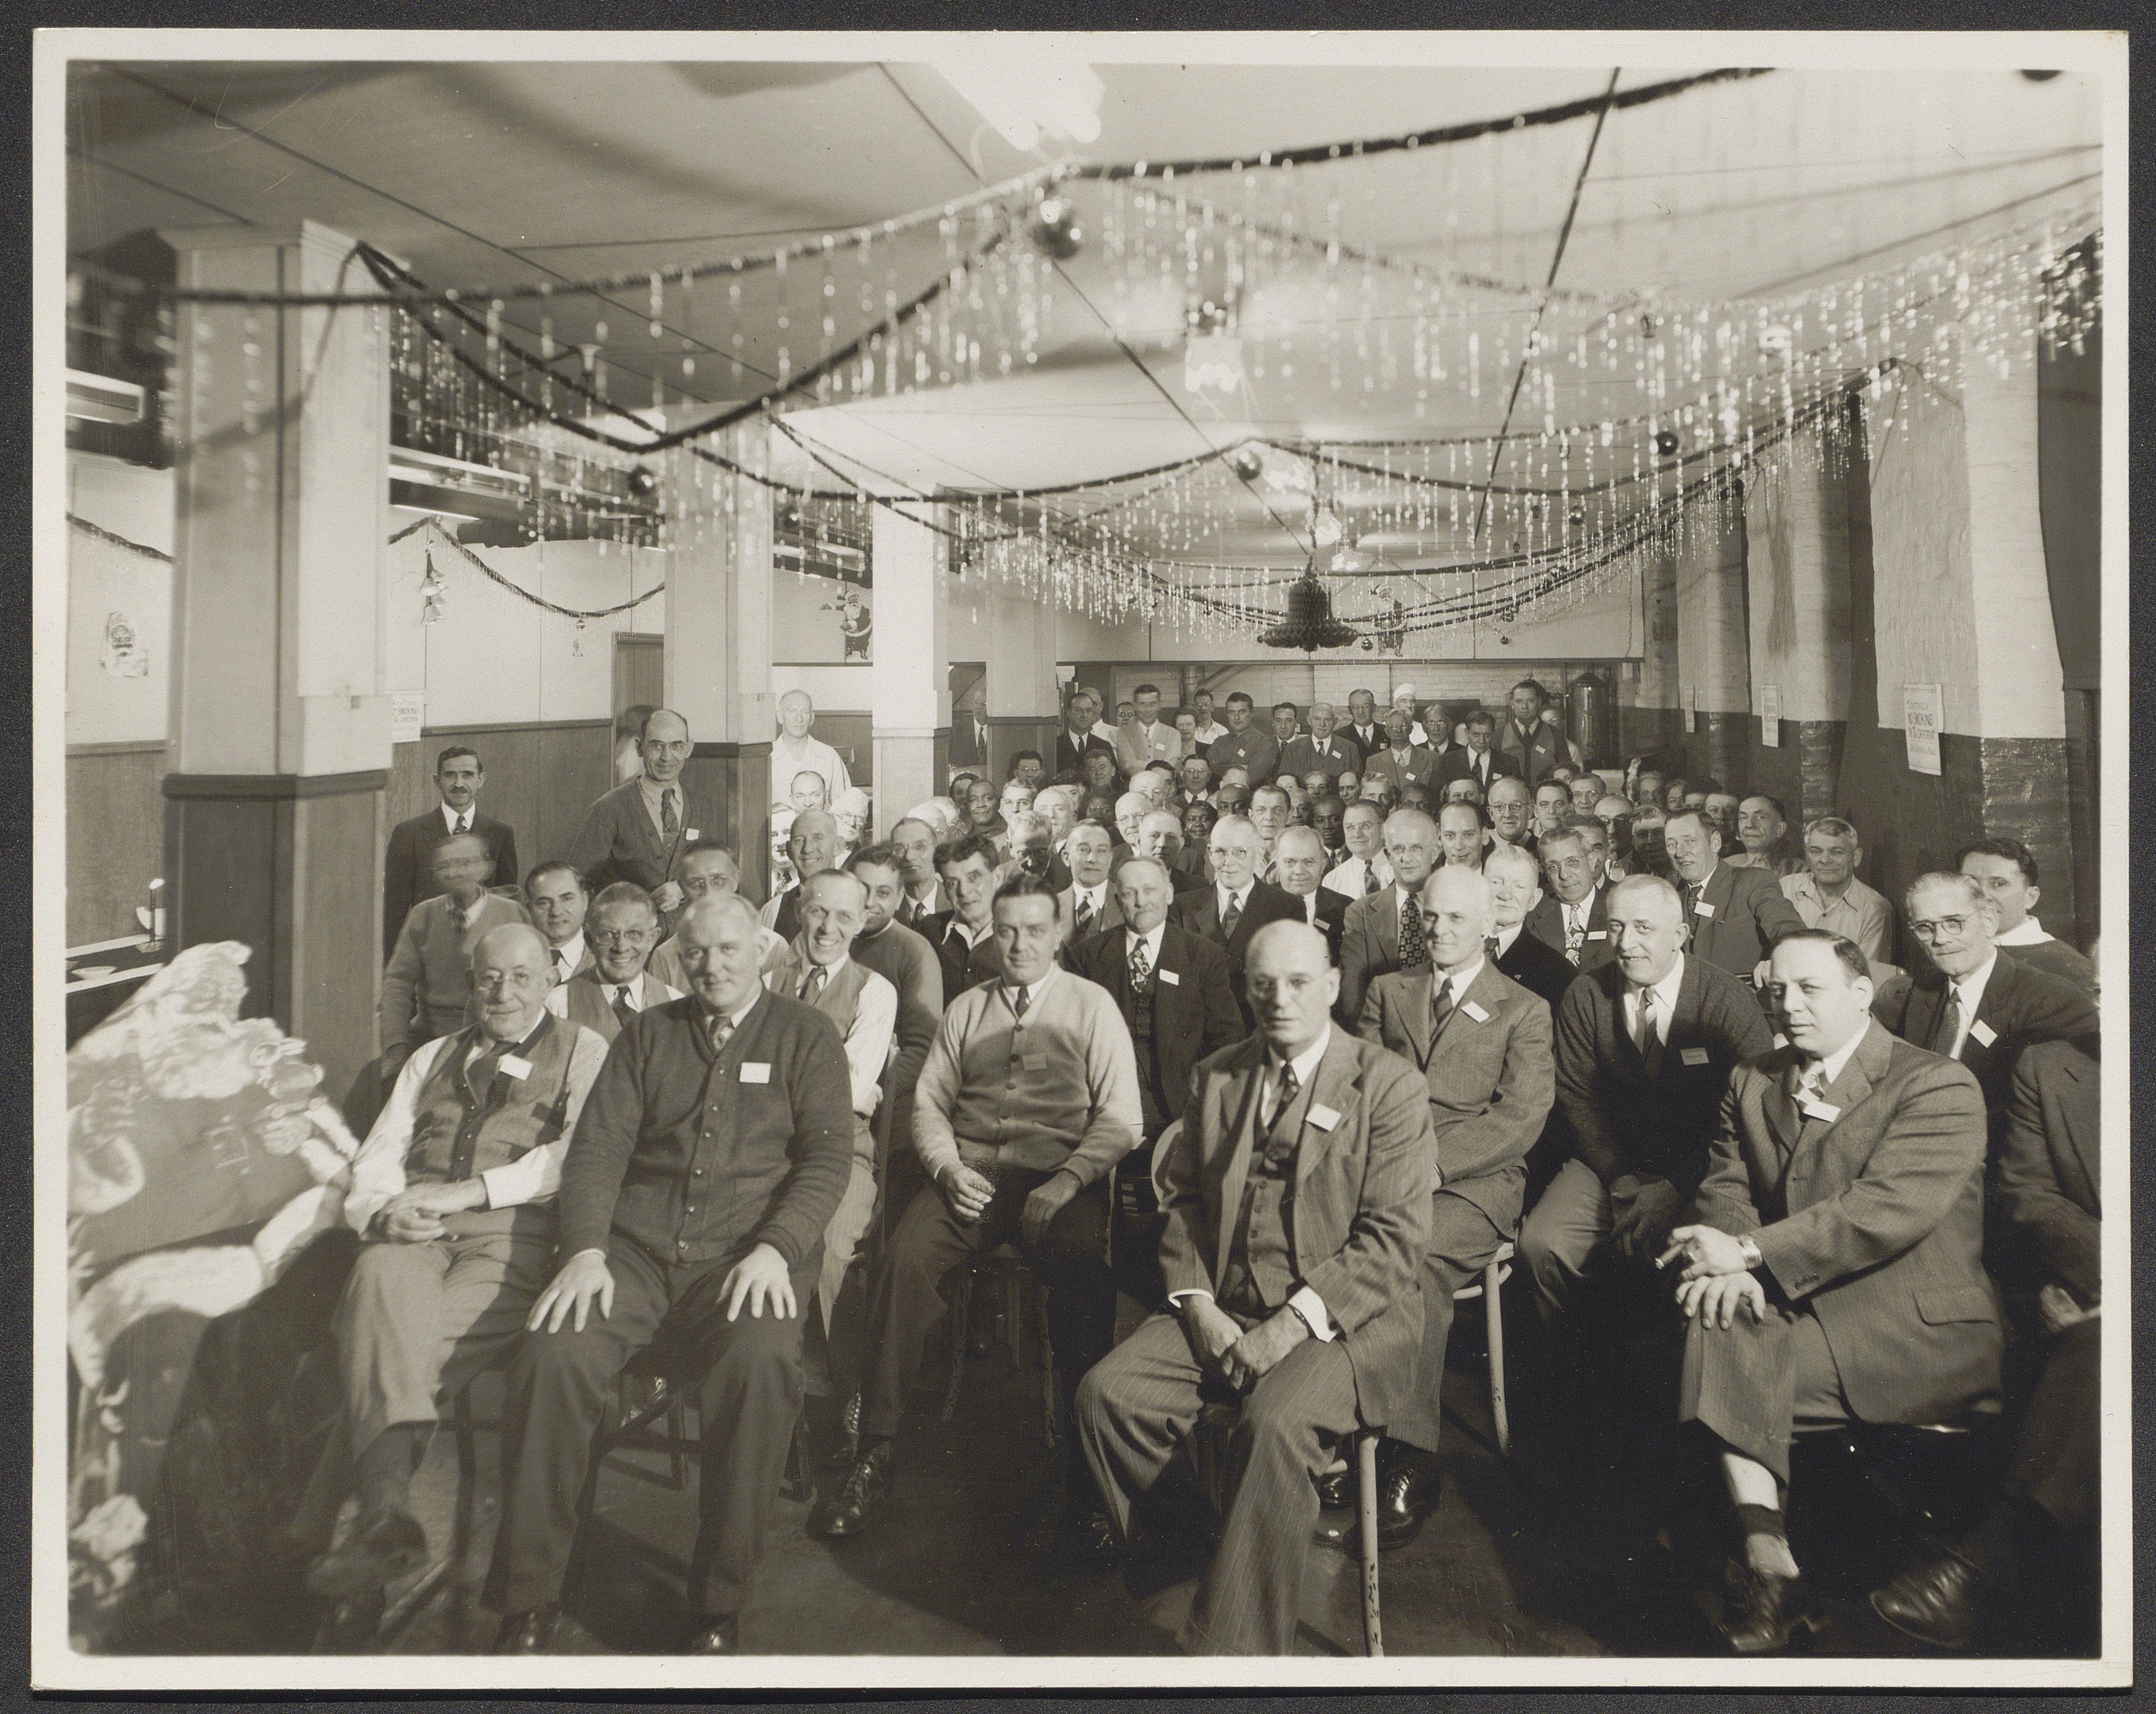 Black and white image of a large number of seated people in a room with Christmas decorations